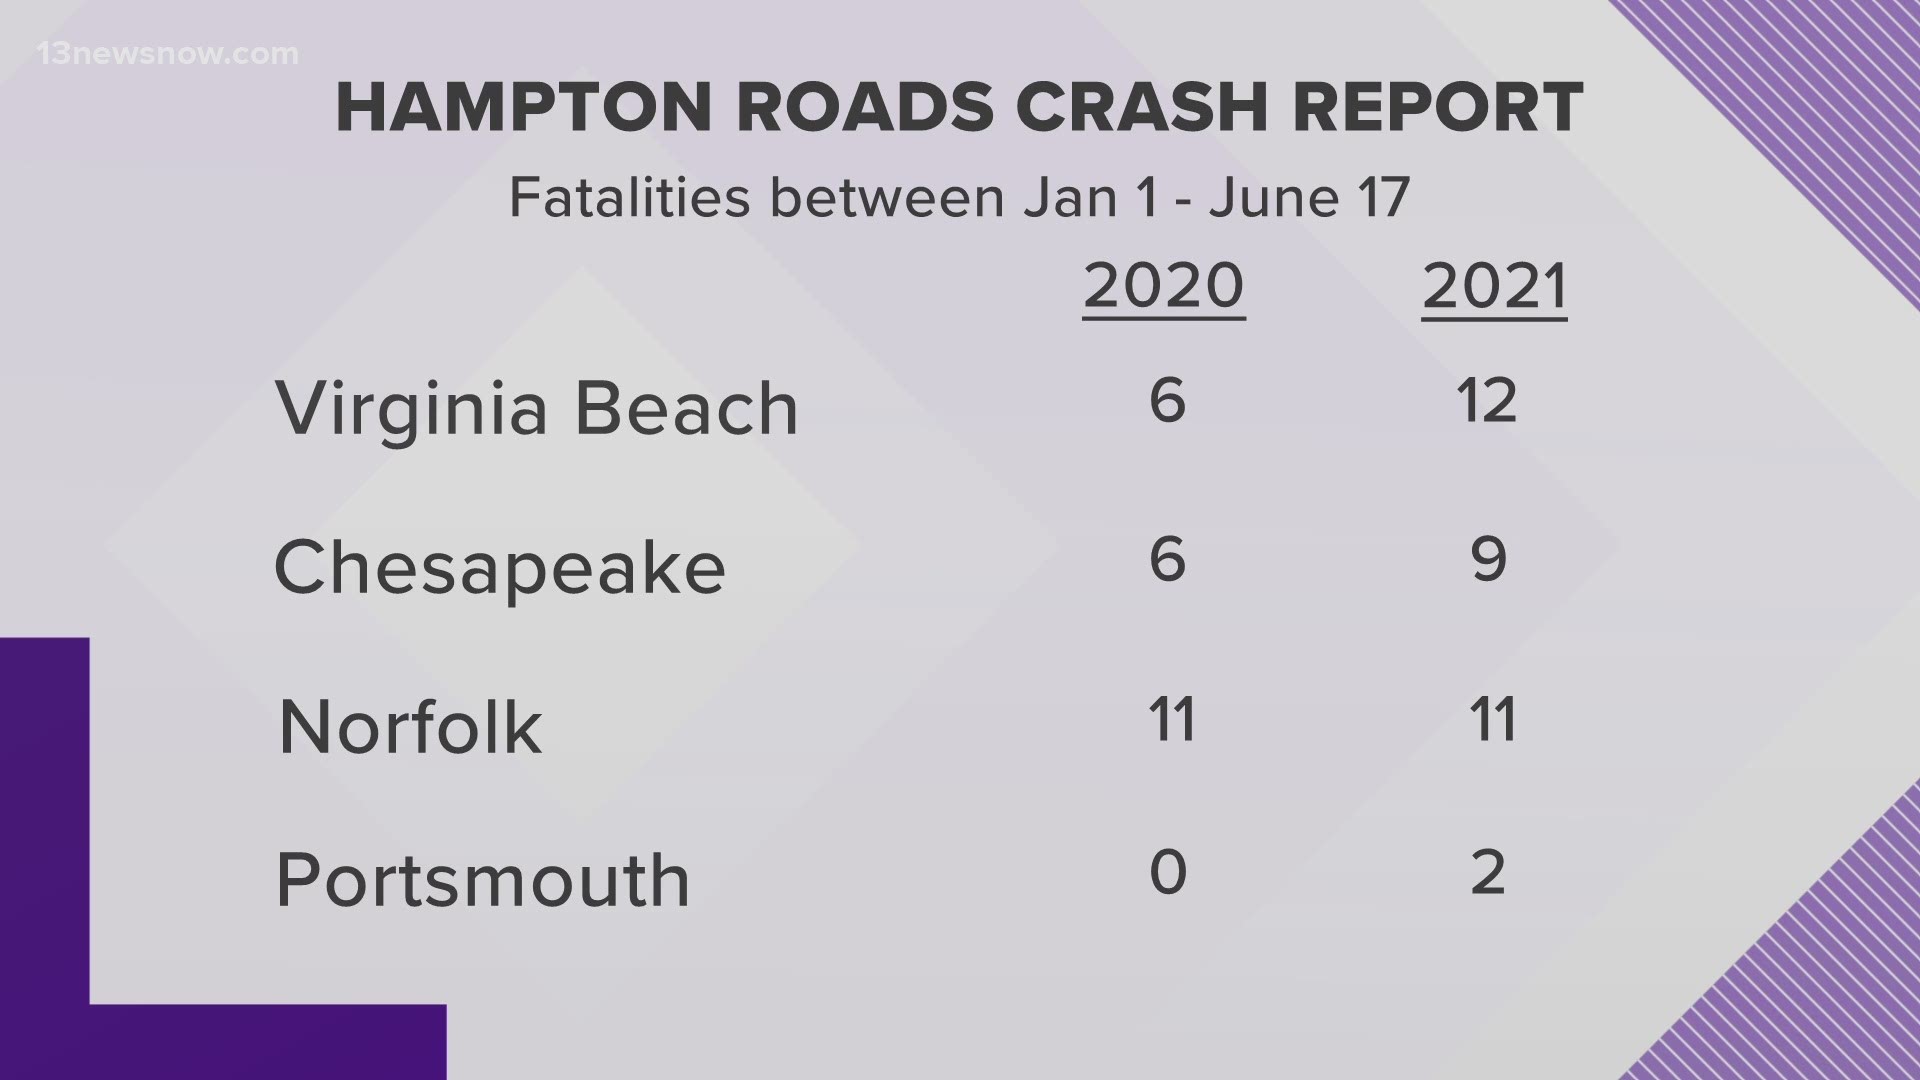 More Virginians than normal have died in crashes, according to Sgt. Anaya. There are more people back on the roads, as pandemic restrictions ease.